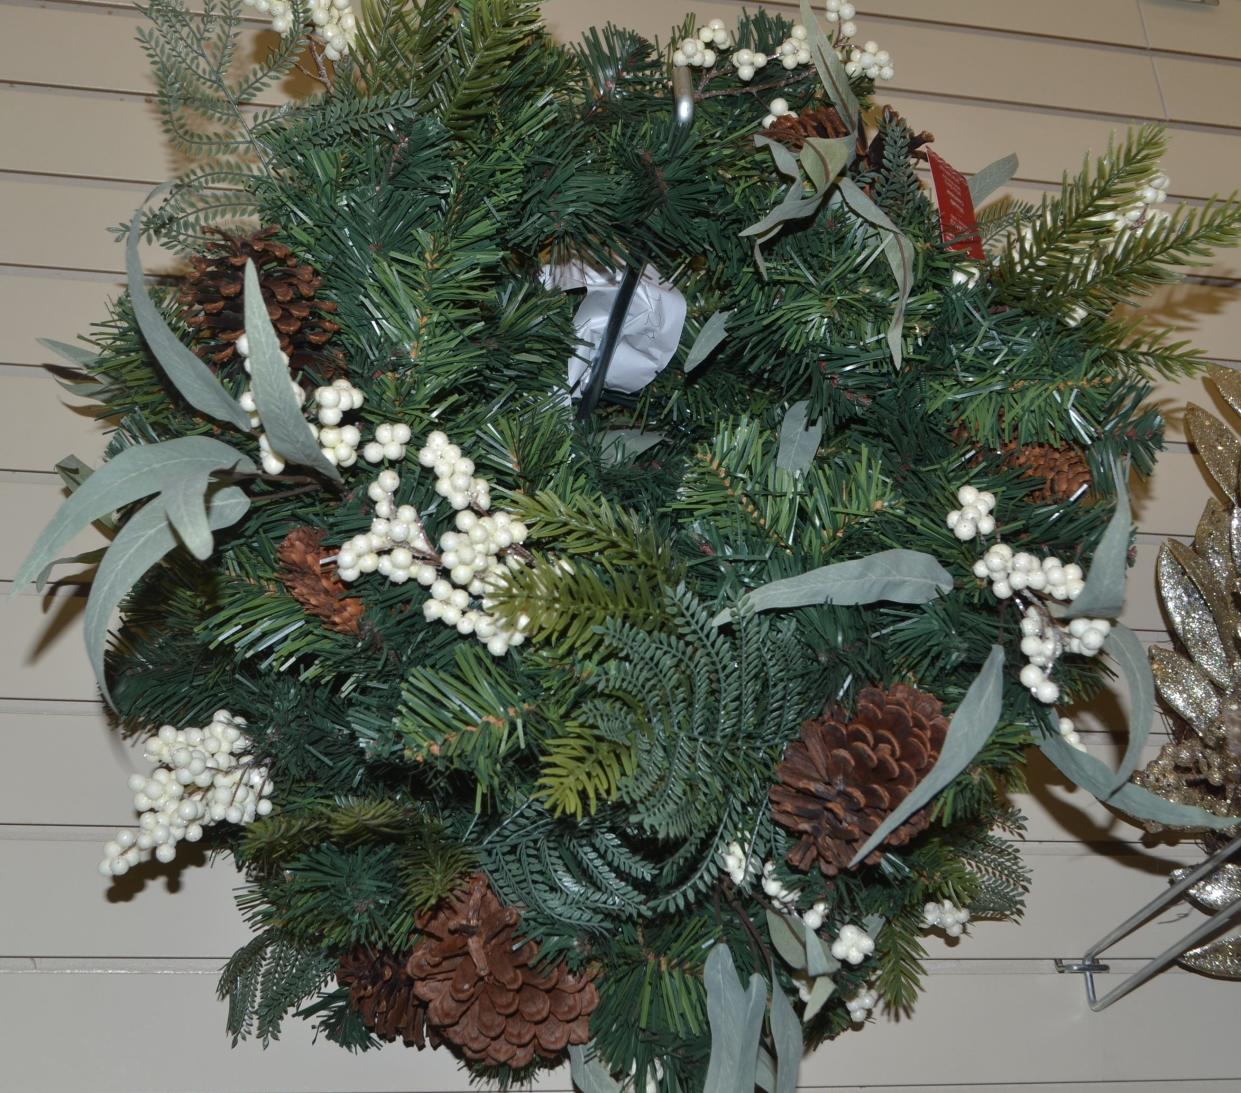 Wreaths represent the circle of life. At Christmas it's viewed as an invitation for Christ and the spirt of Christmas to enter the home.